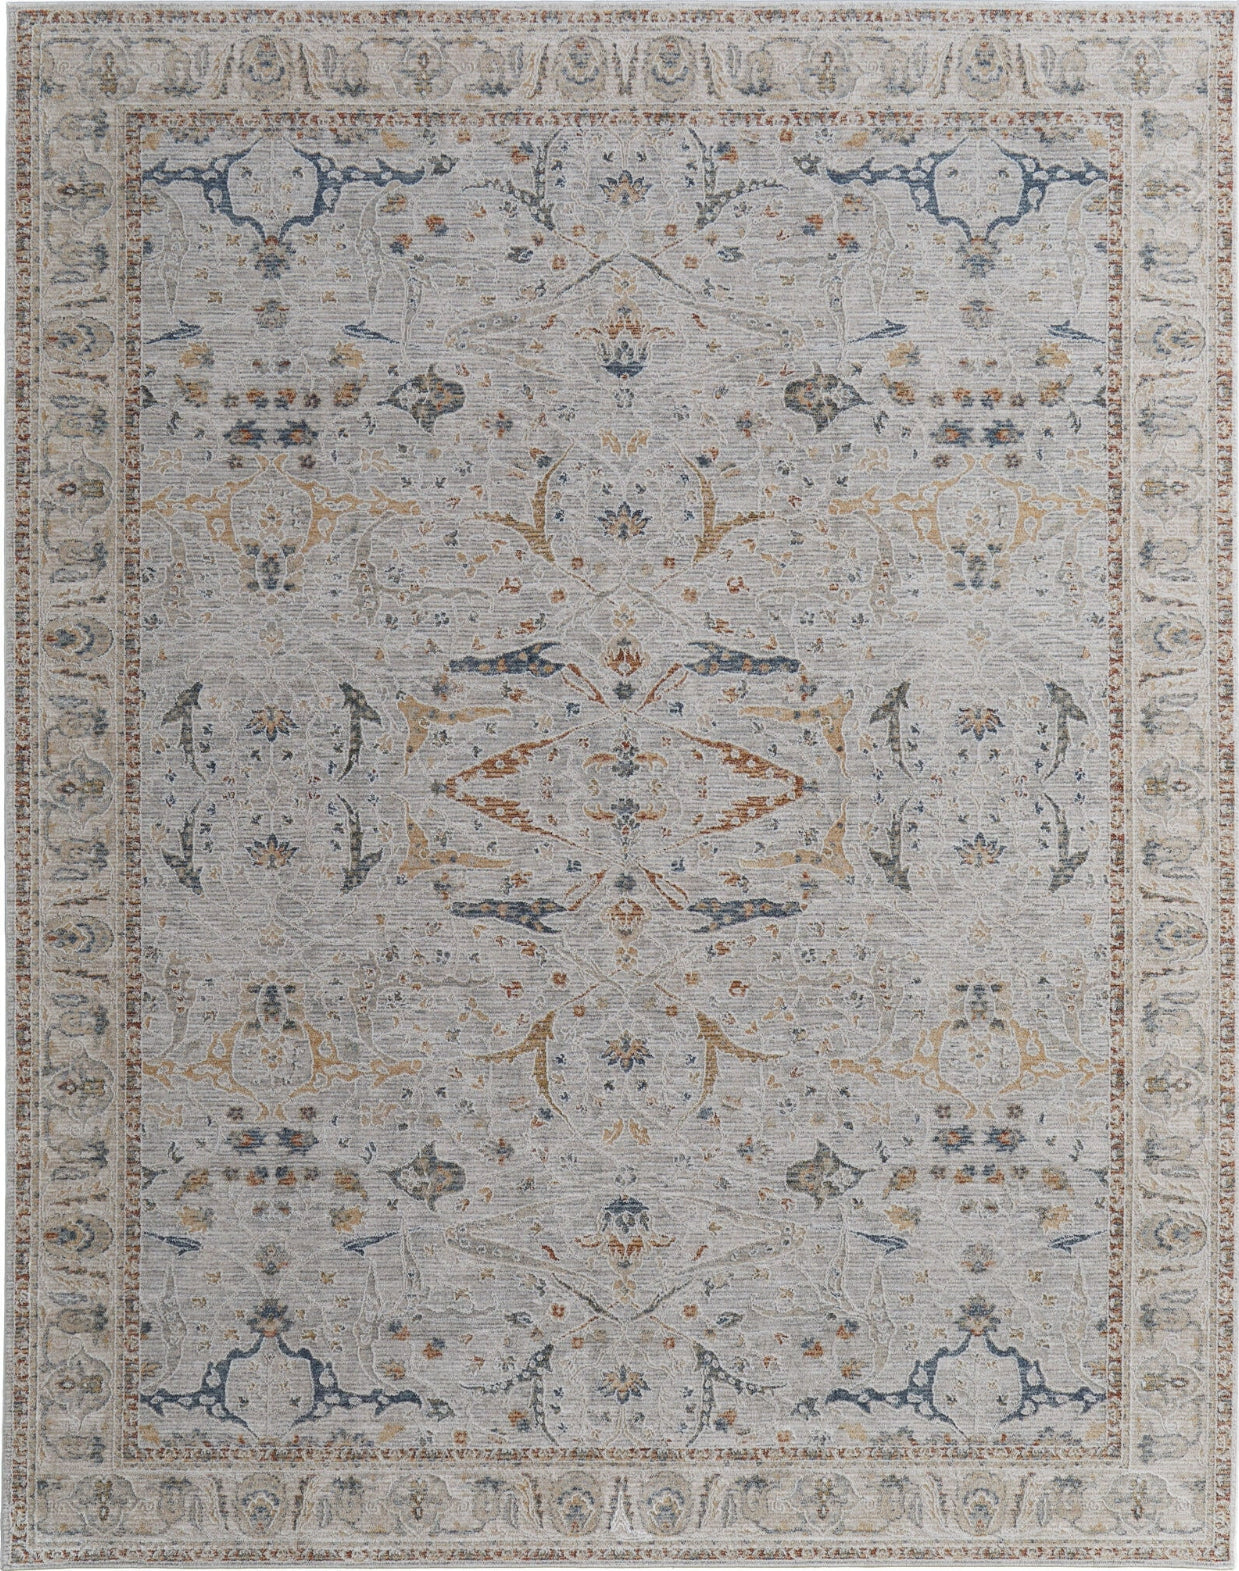 Feizy Pasha 39M4F Ivory/Blue/Taupe Area Rug